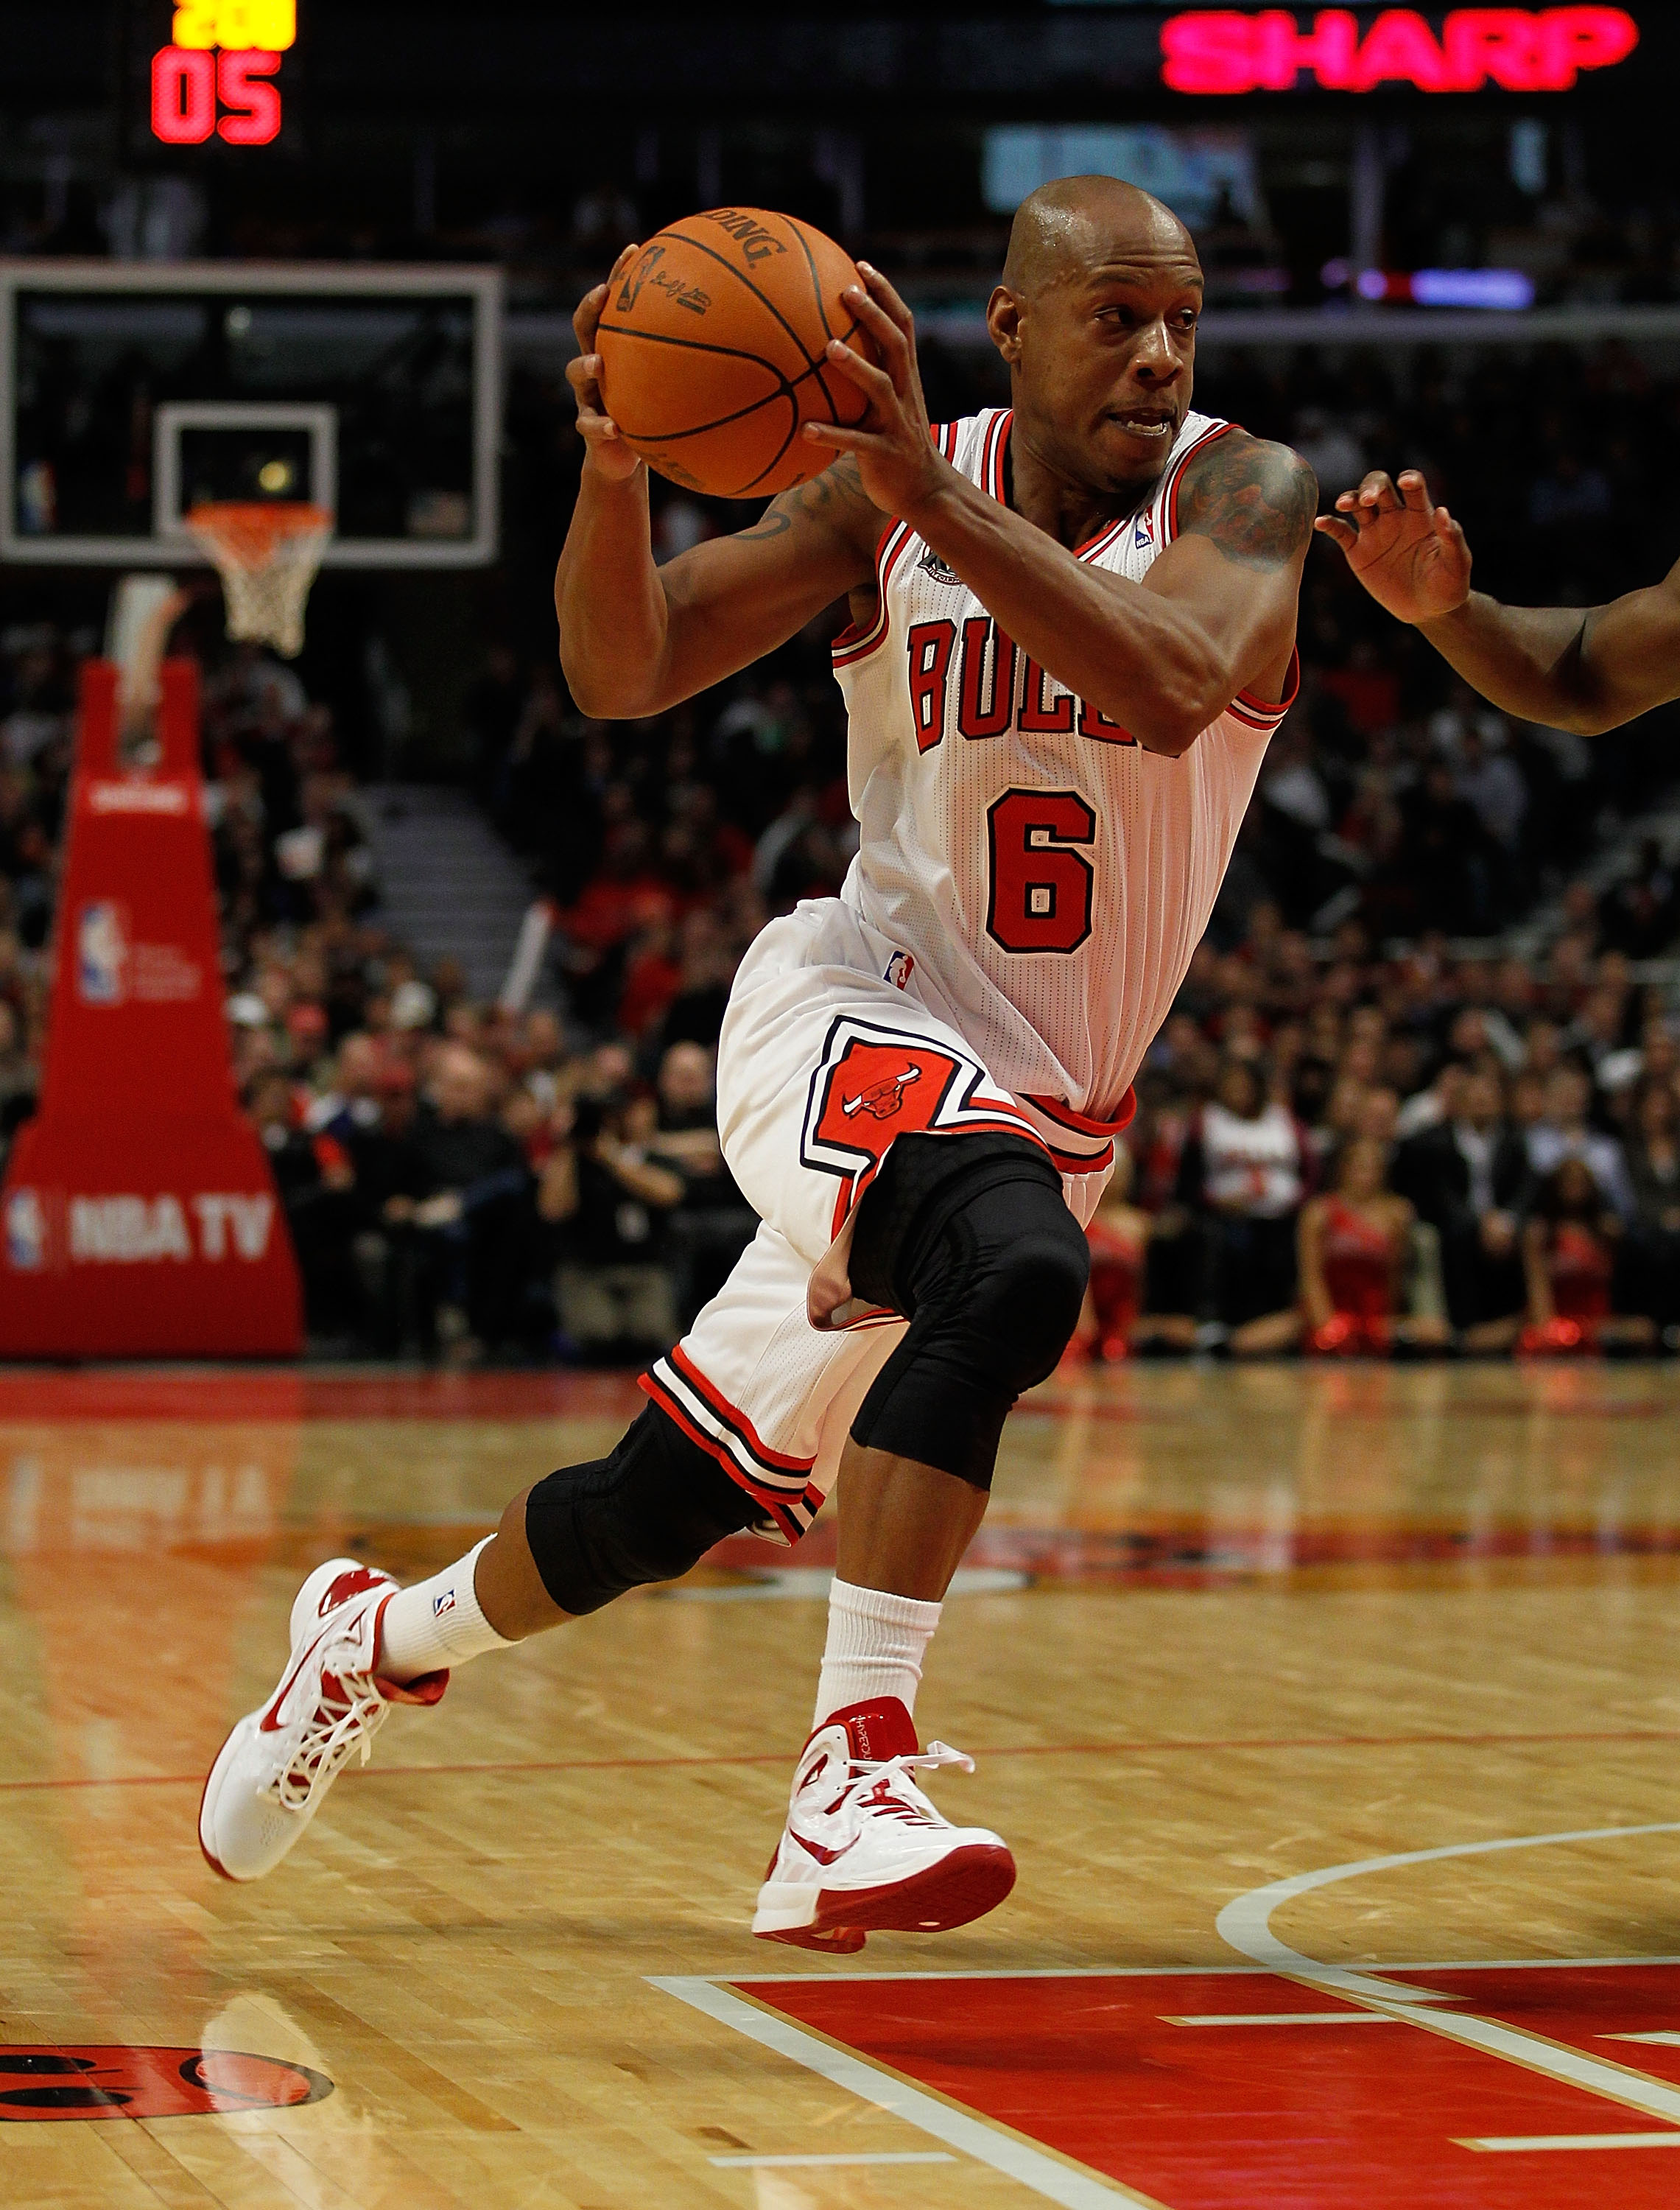 CHICAGO - NOVEMBER 04: Keith Bogans #6 of the Chicago Bulls drives to the lane against the New York Knicks at the United Center on November 4, 2010 in Chicago, Illinois. The Knicks defeated the Bulls 120-112. NOTE TO USER: User expressly acknowledges and 